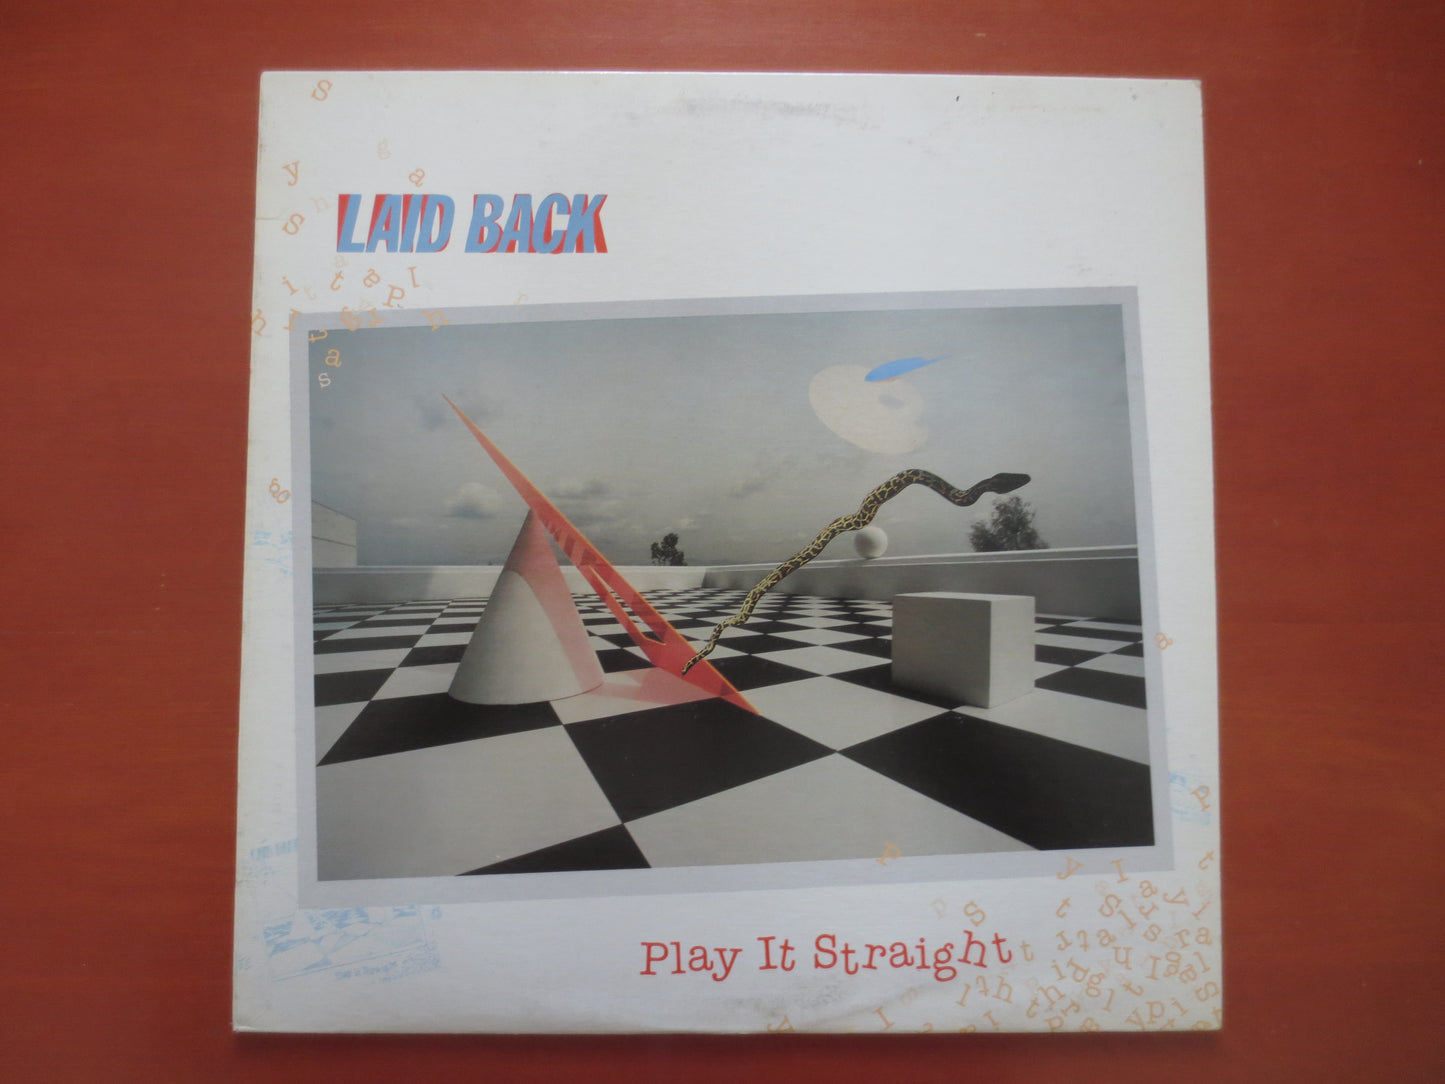 LAID BACK, PLAY It Straight, Vintage Vinyl, Laid Back Record, Laid Back Vinyl, Laid Back Album, Vinyl Records, 1985 Records